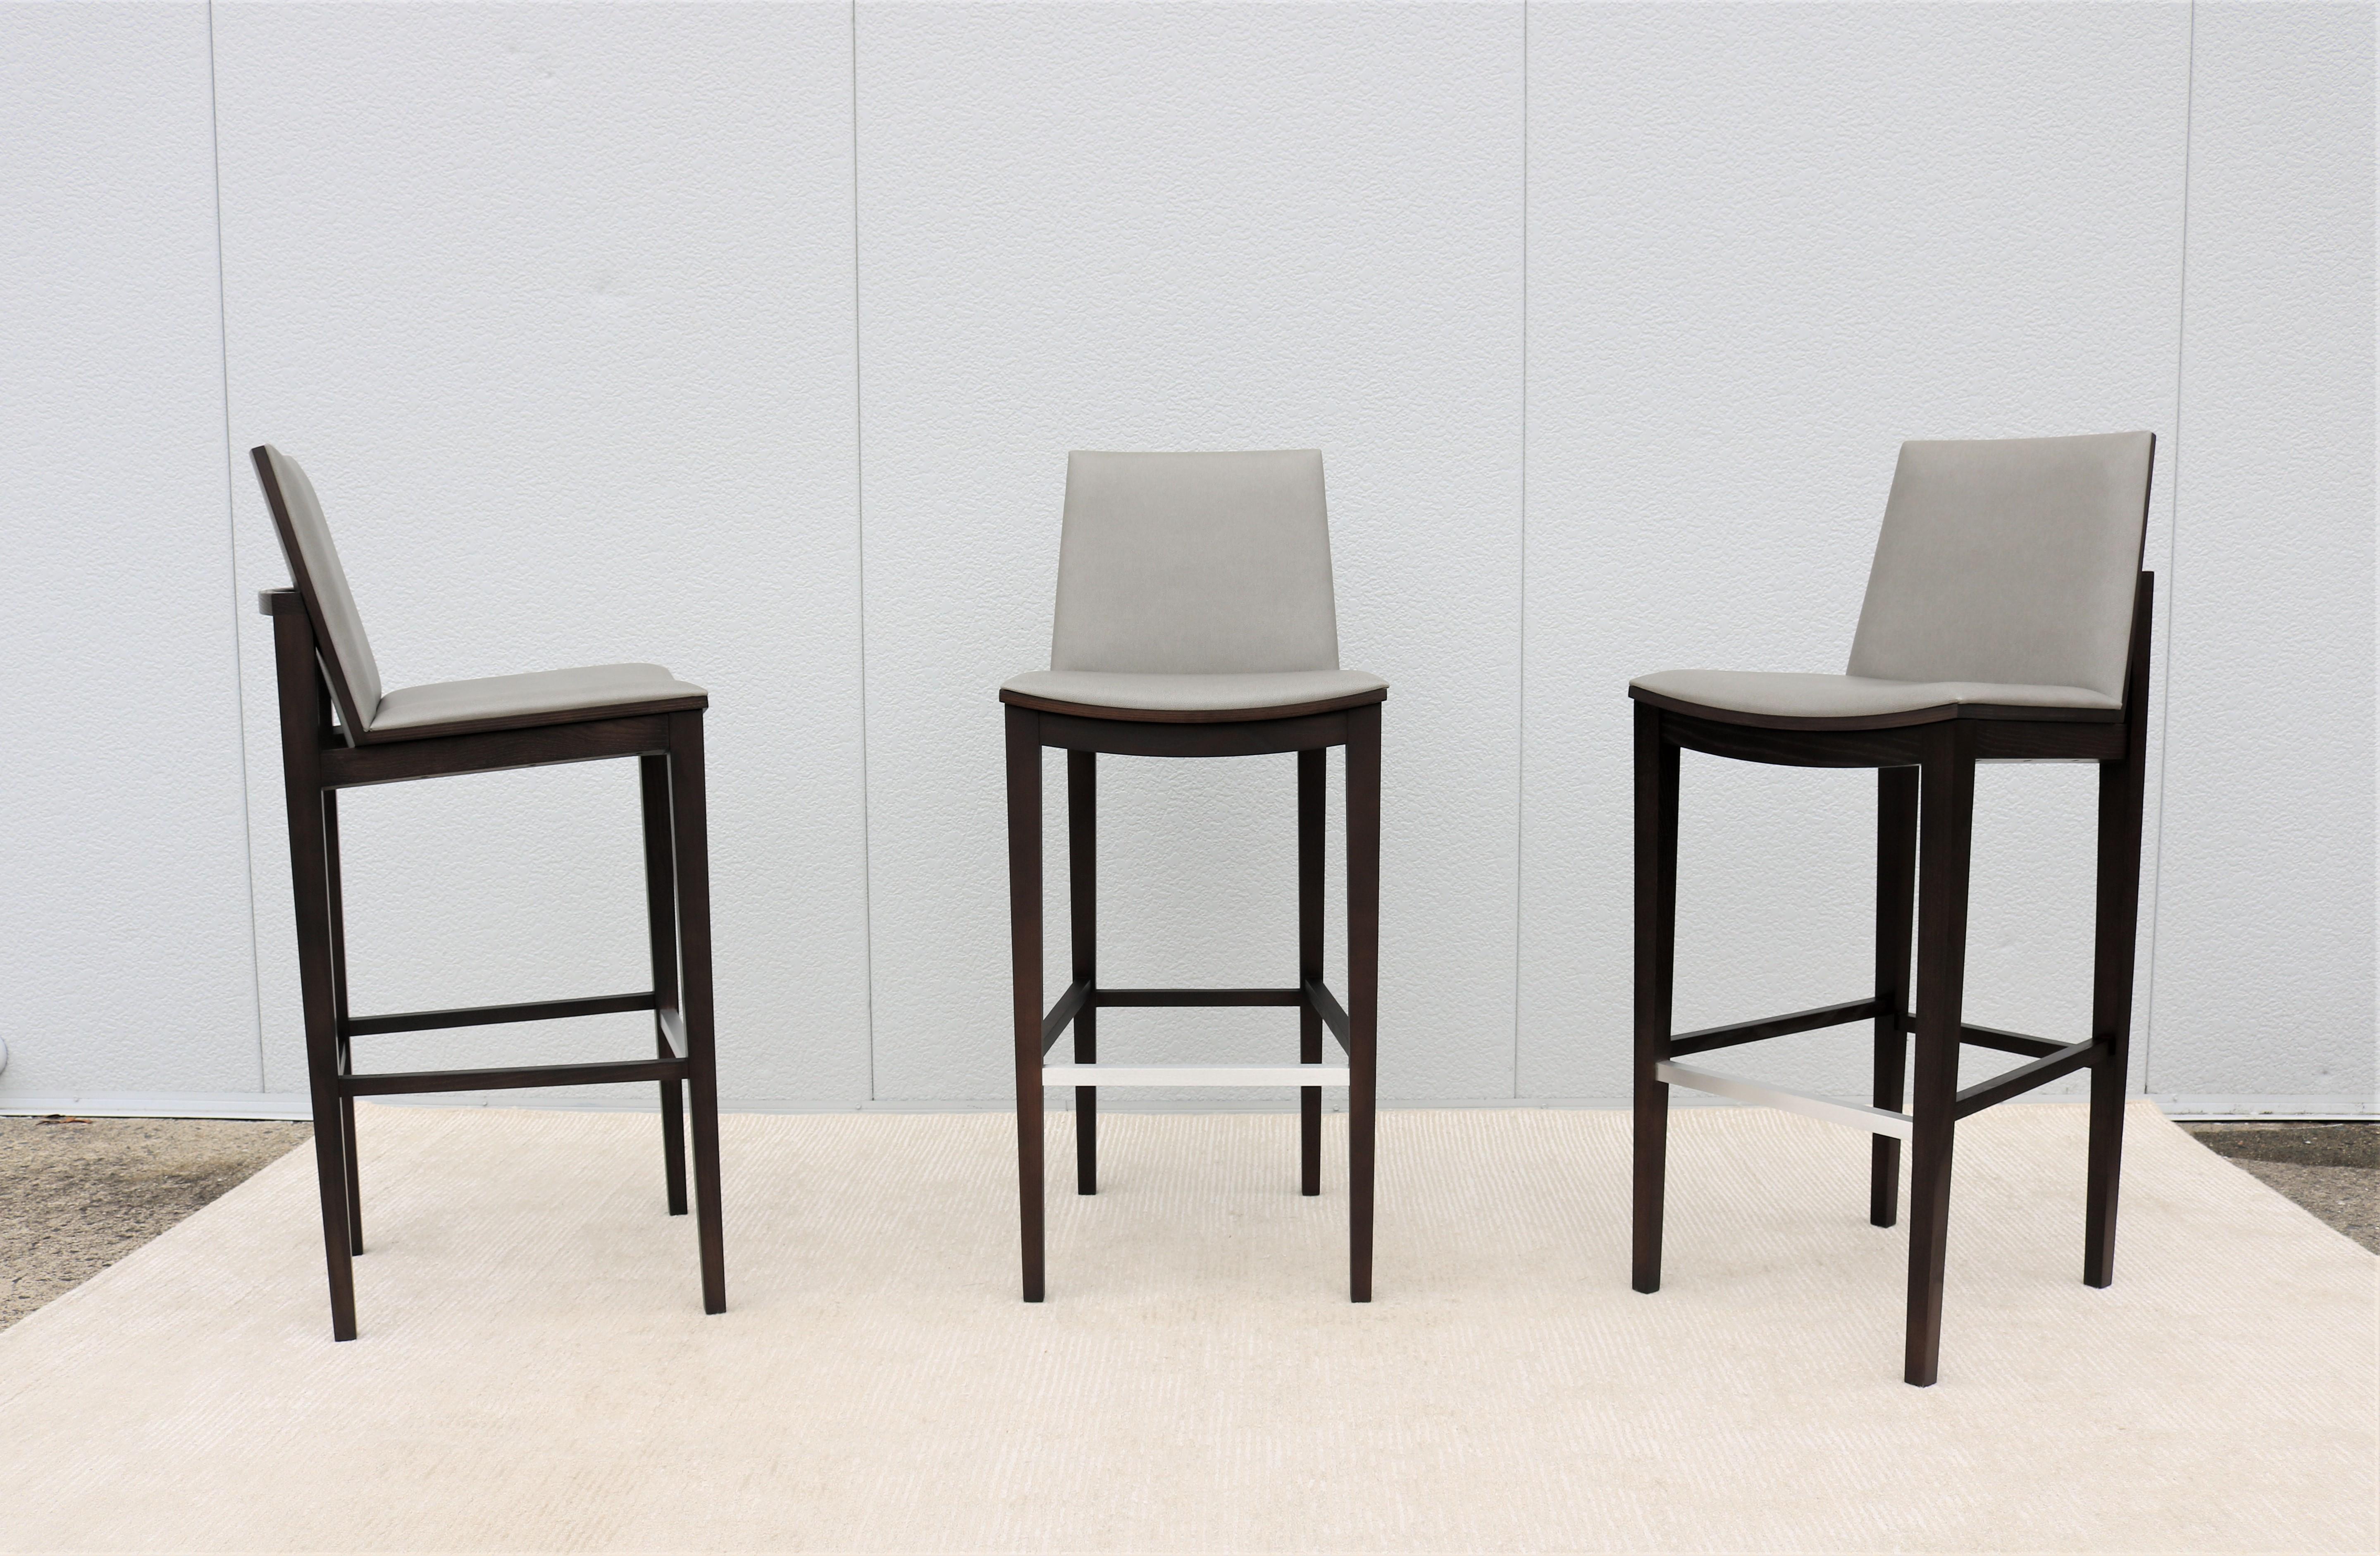 Fabulous set of 3 contemporary Classic Carlyle Barstools with footrest.
Named for the historic Carlyle Hotel in New York City.
The timeless design combines rich materiality with Classic forms.
Have been crafted with the utmost care of every